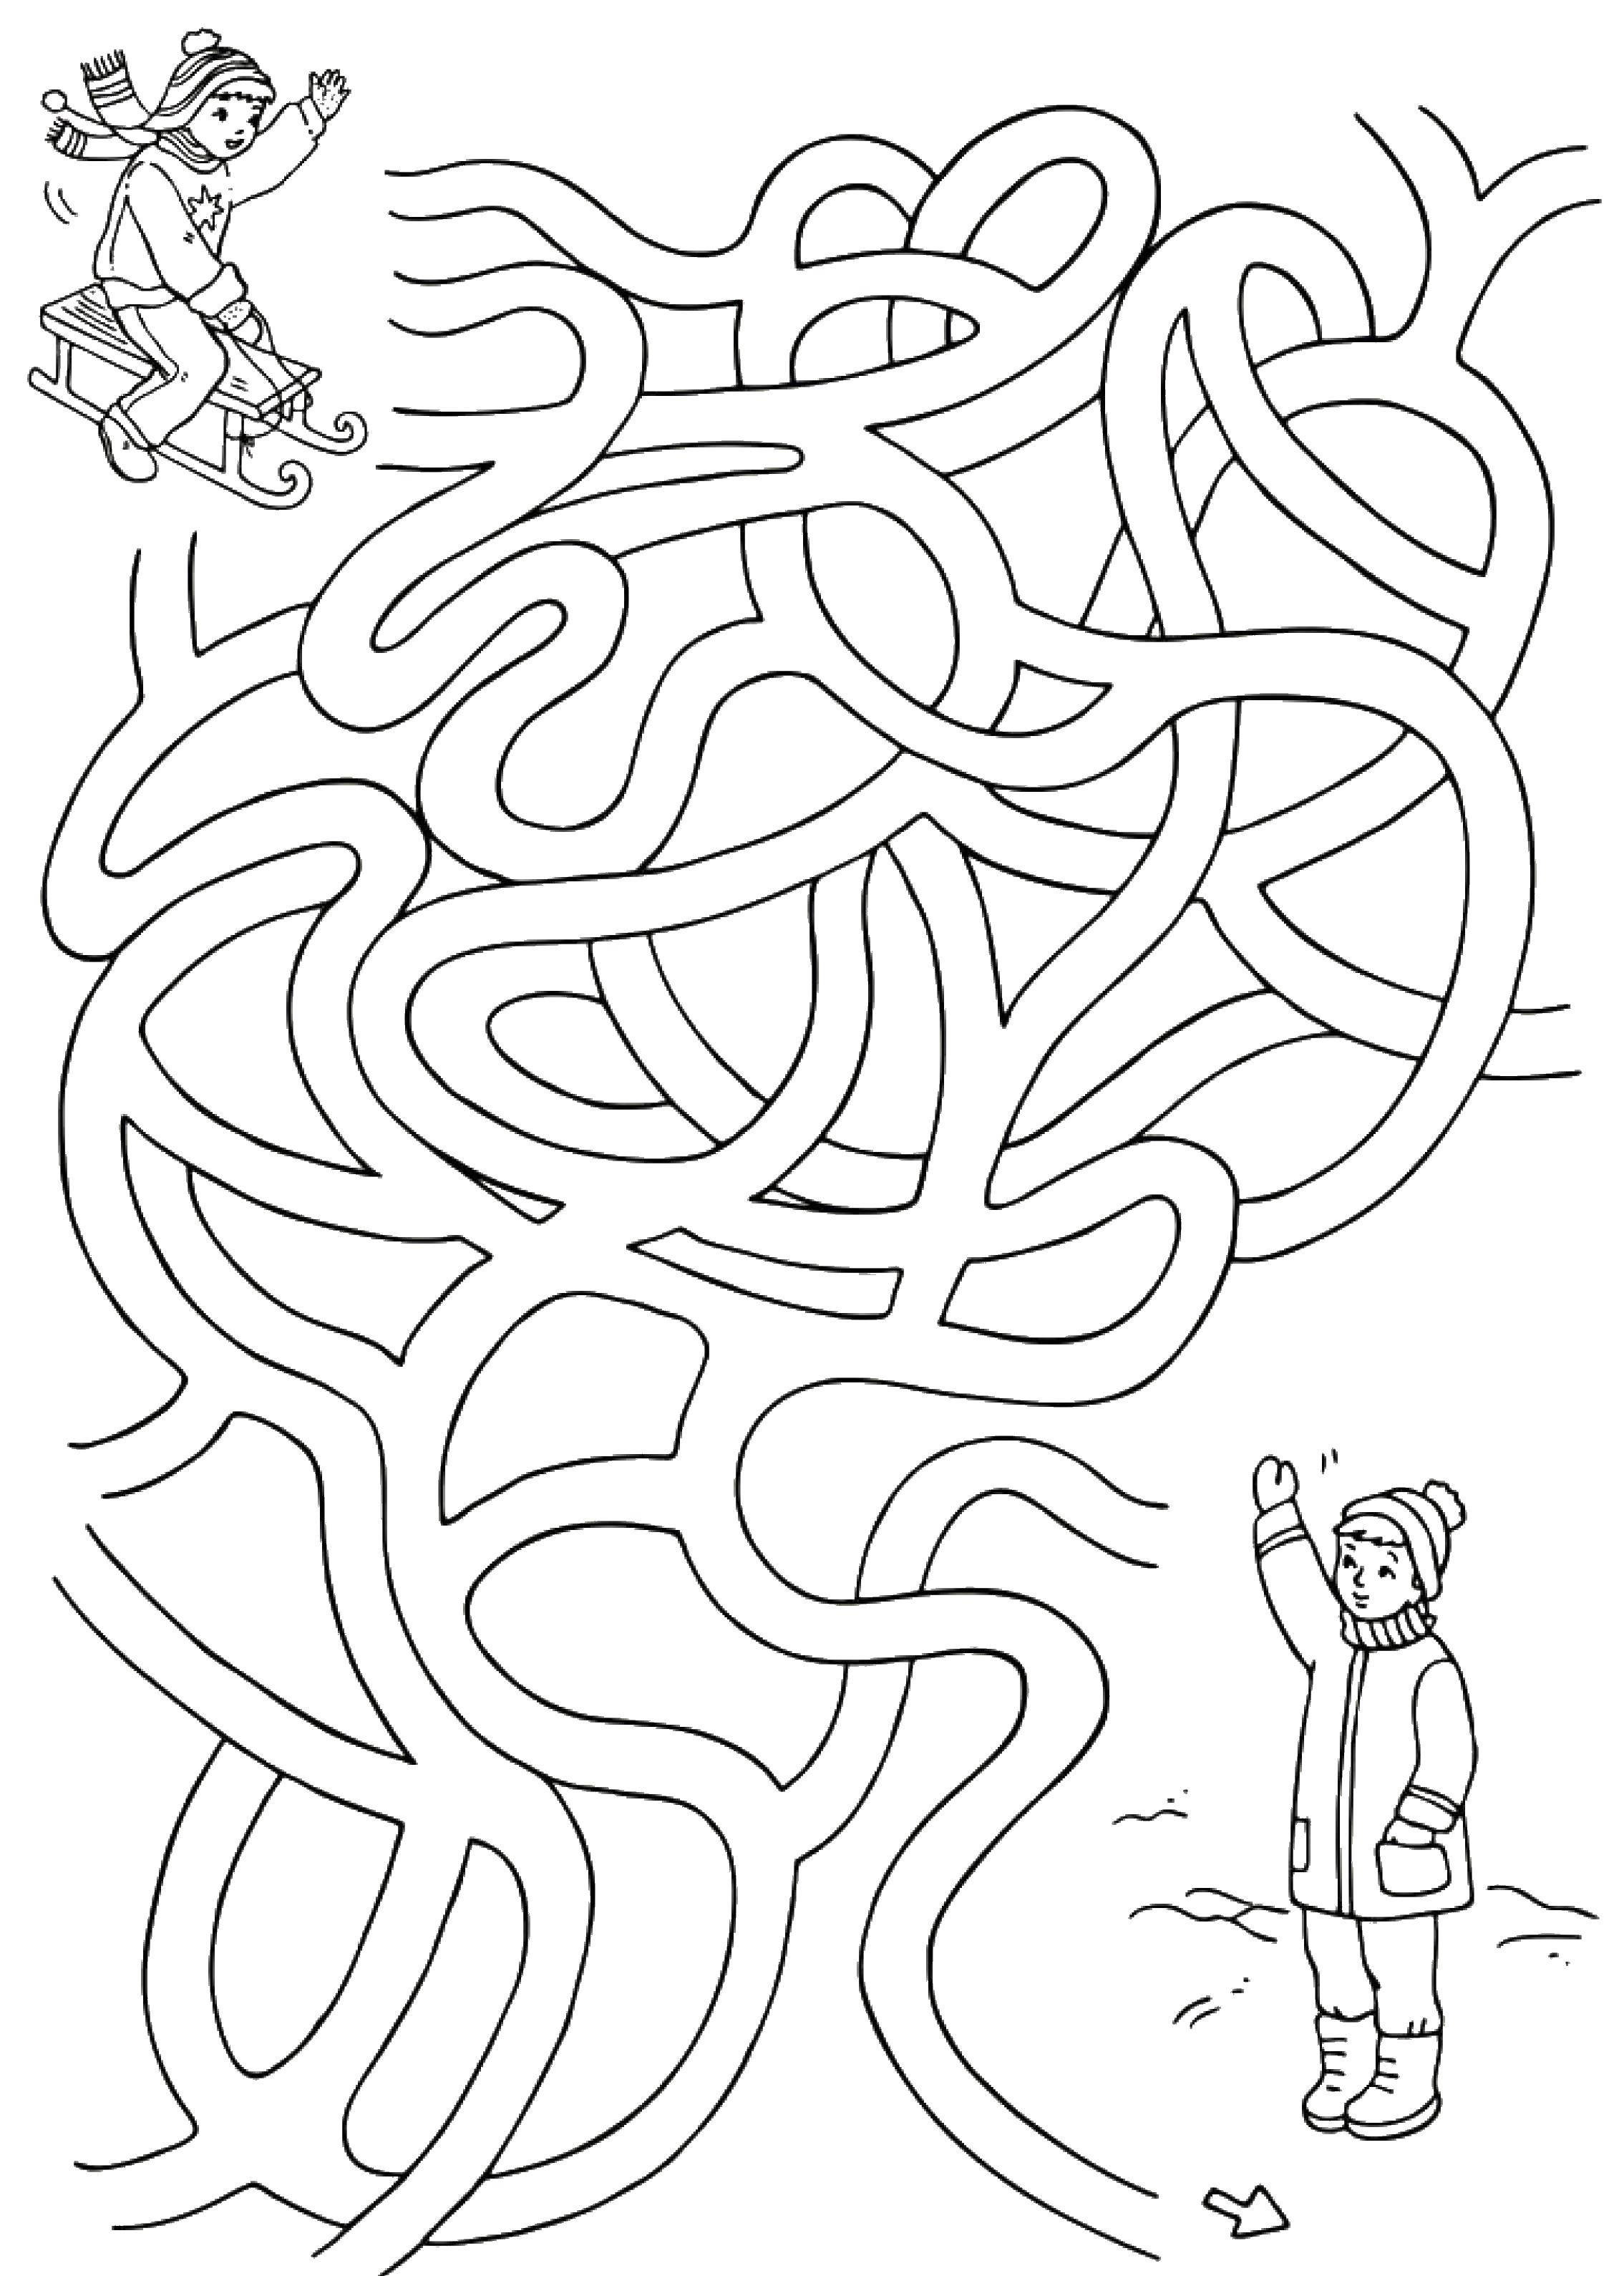 Coloring Go through the maze to the sleigh. Category riddles for kids. Tags:  Maze, logic.